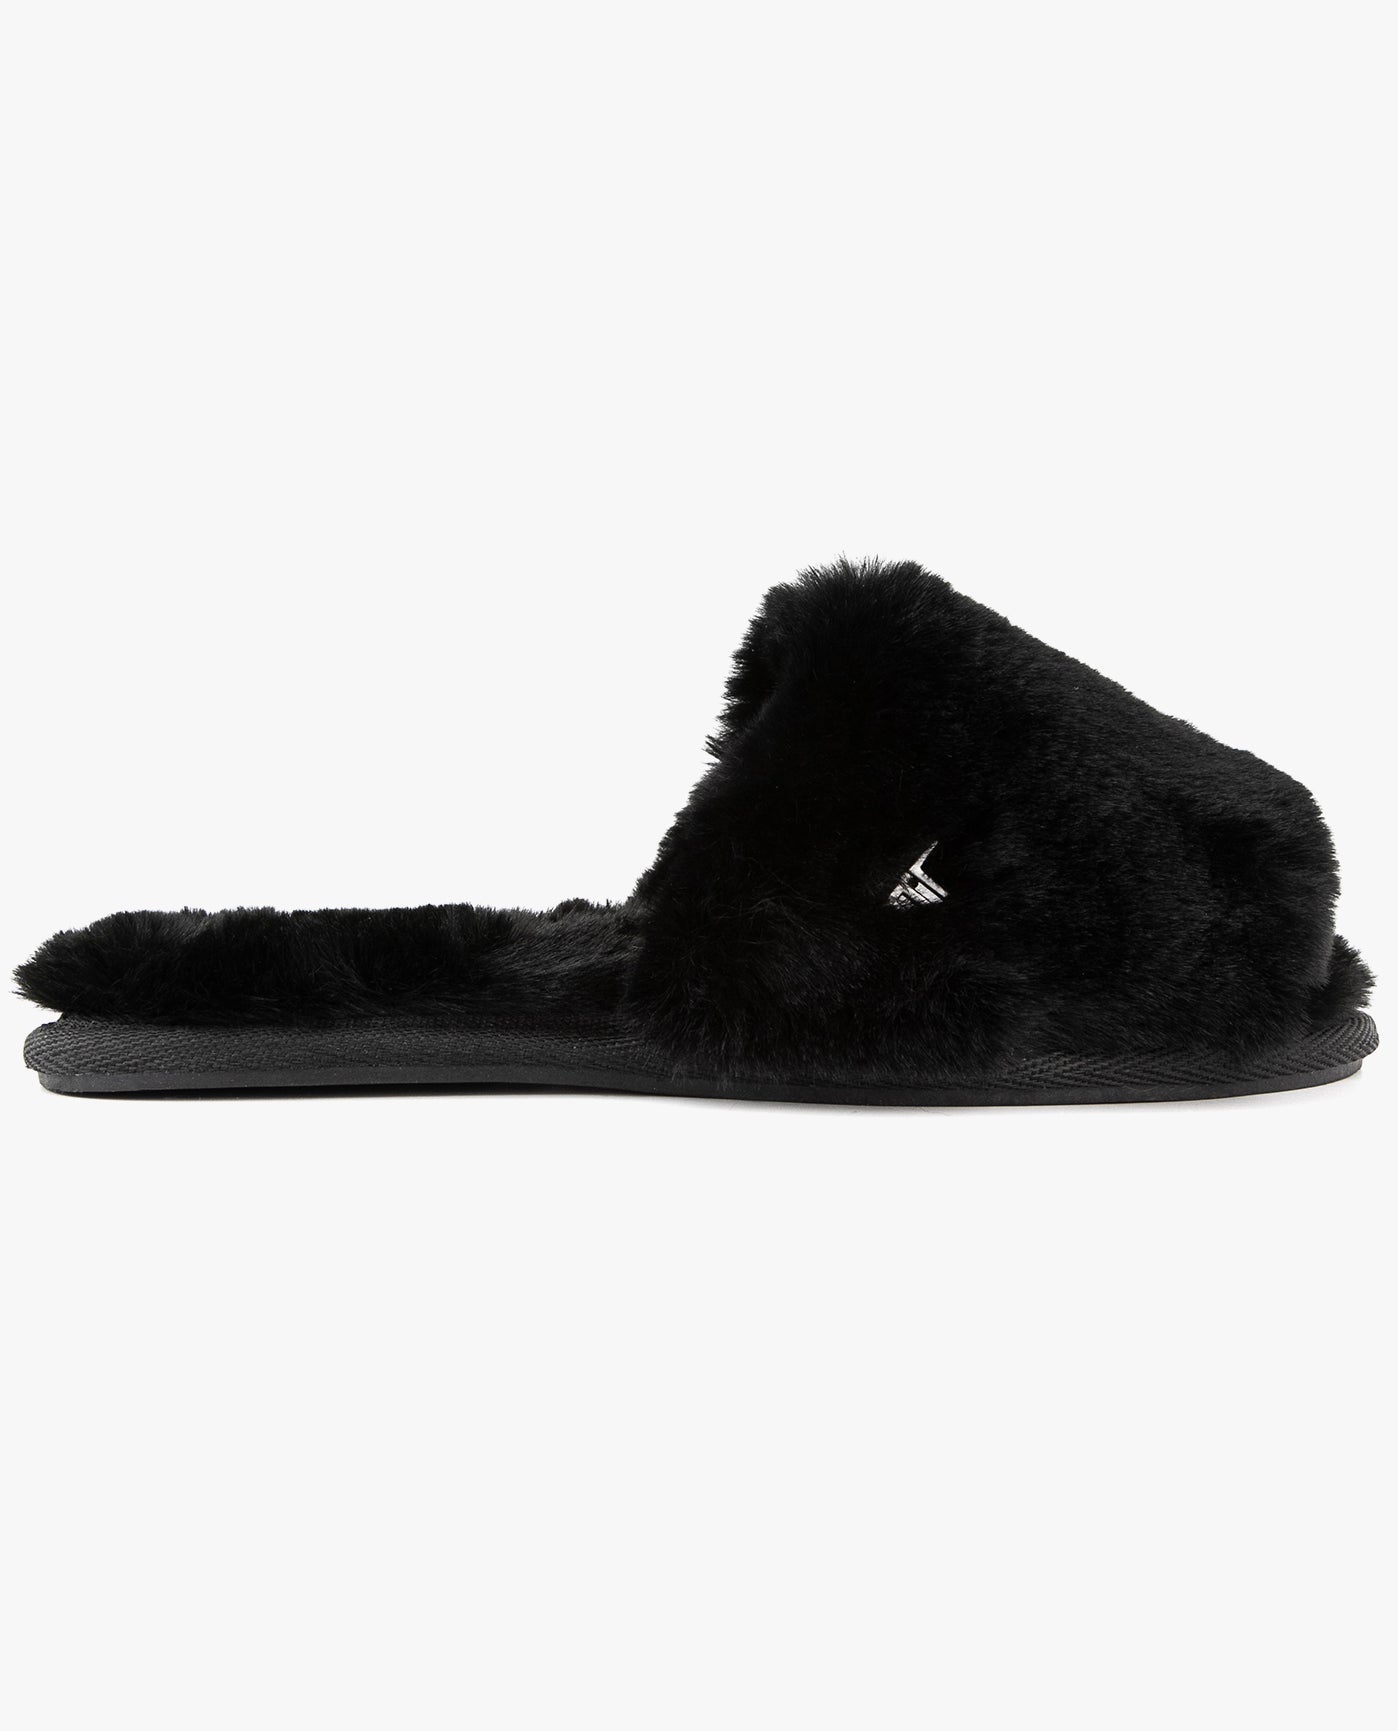 MAIN IMAGE OF WOMENS LILLY OPEN TOE FAUX FUR SLIPPER | ESO_BLACK_001